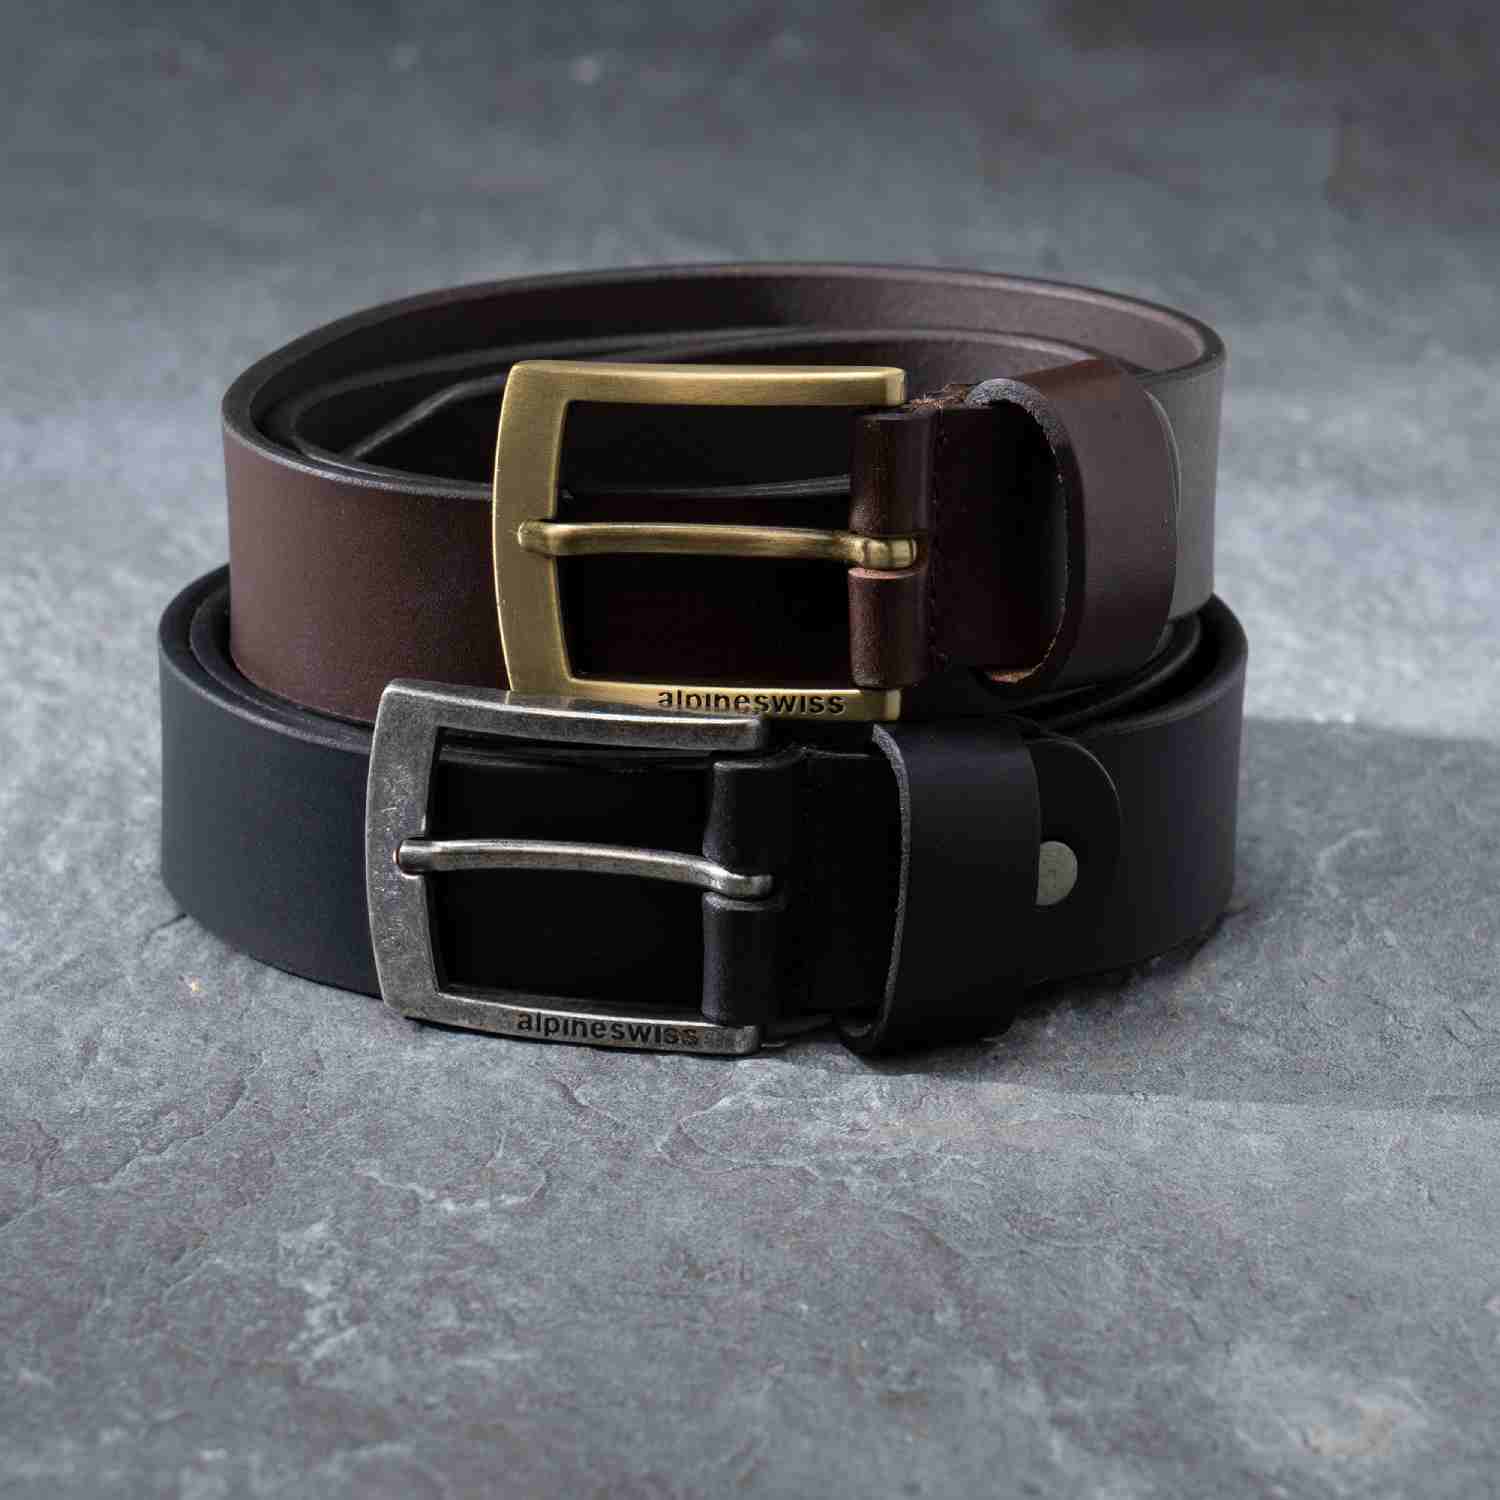 leather belt as a gift for groom